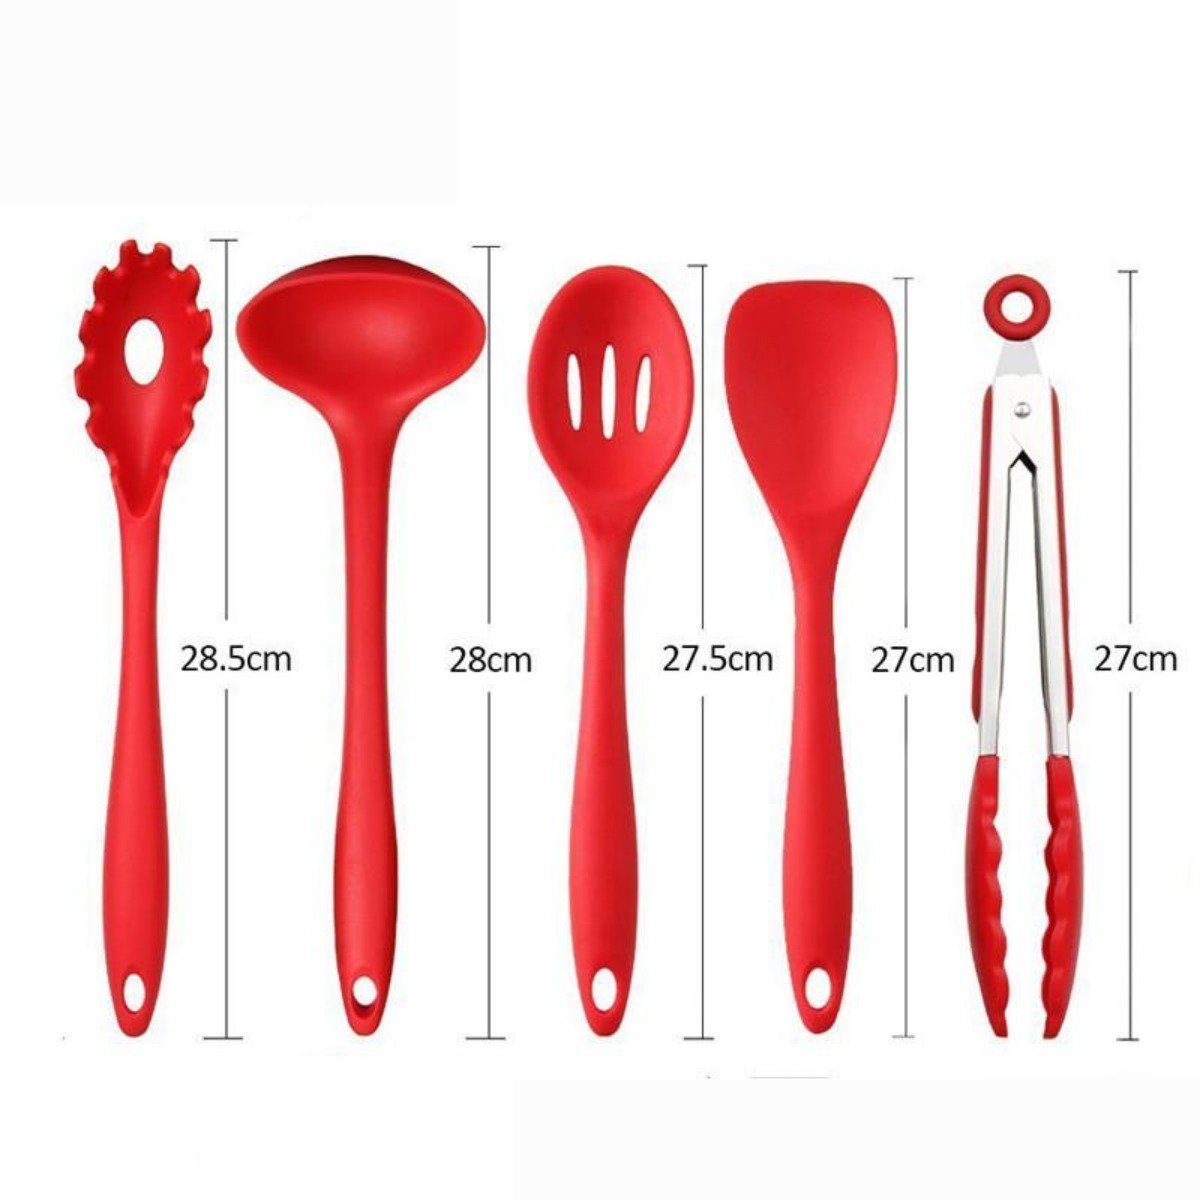 A set of Non Stick Silicone Cooking Utensils Premium Heat Resistant 10 PCS Set, including spatulas, spoons, tongs, and a whisk, arranged on a white background.